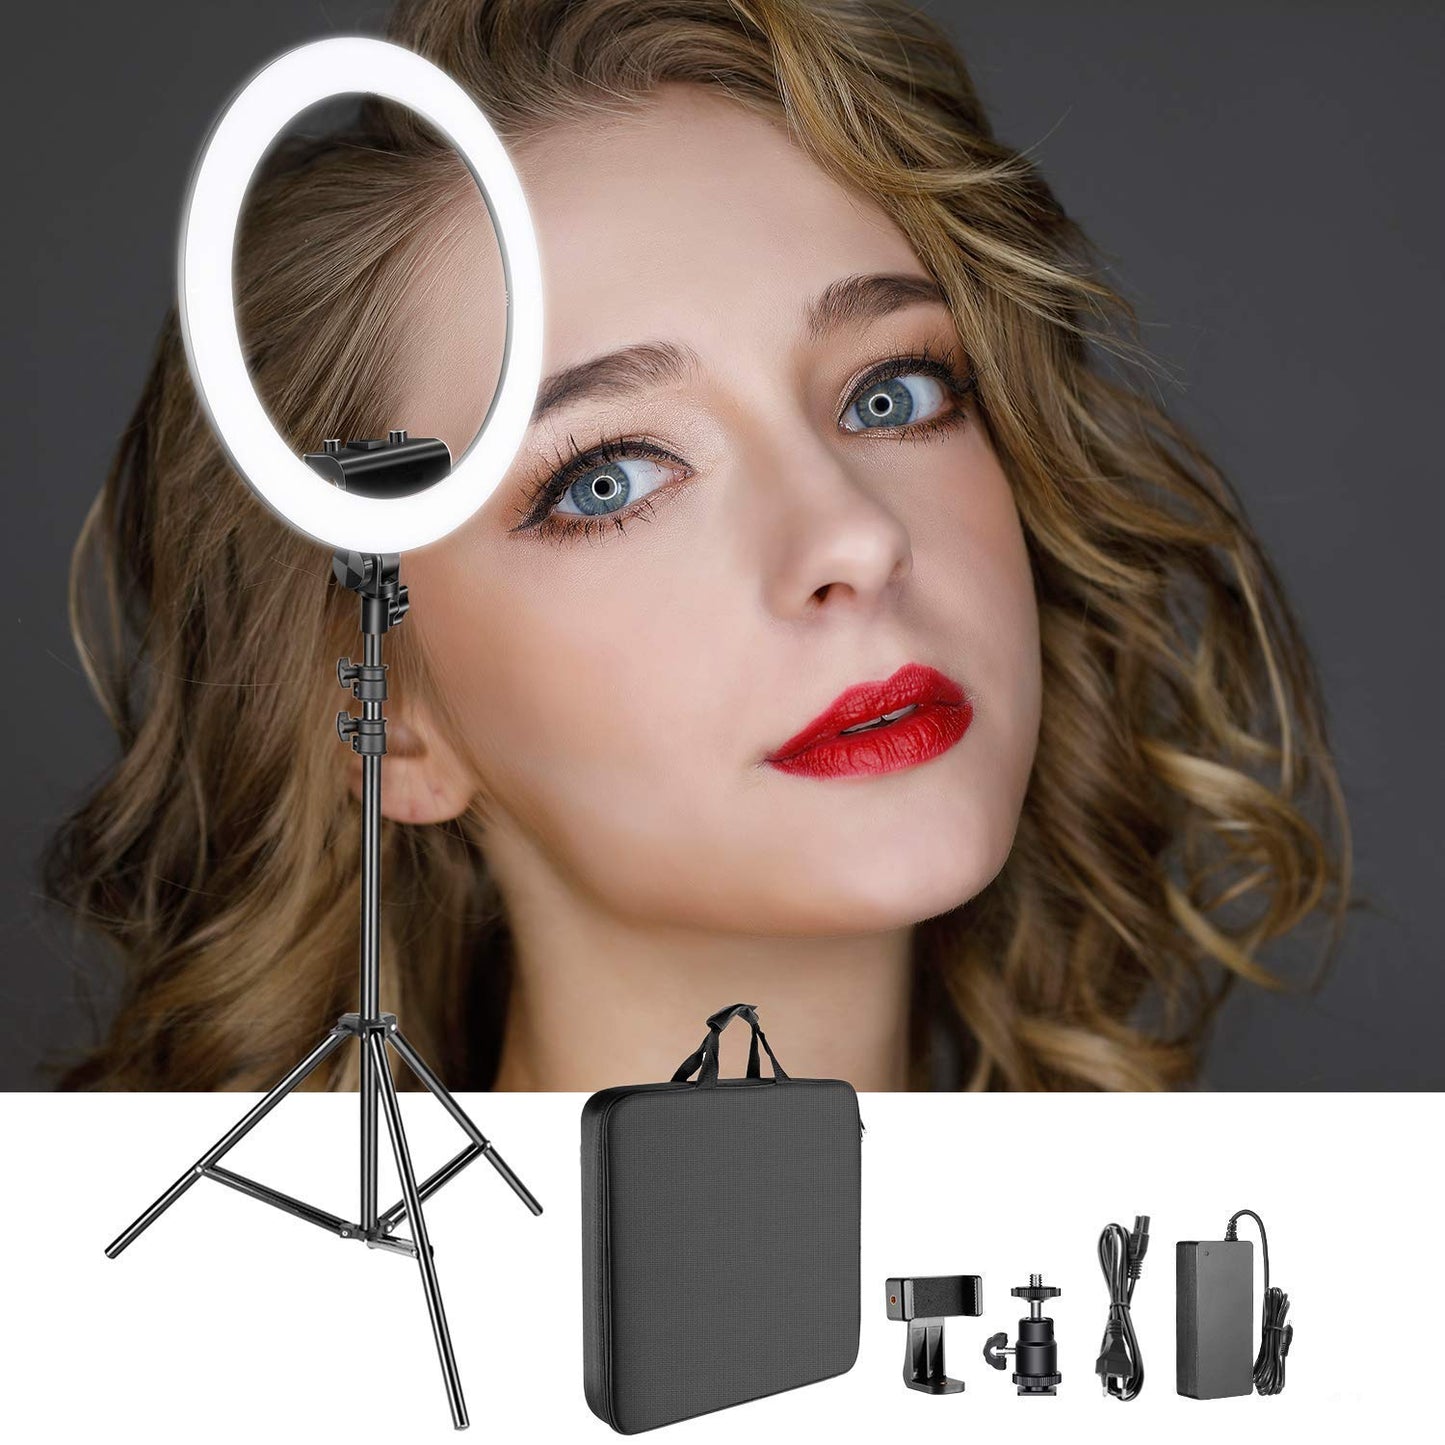 Ring Light Kit 12 inches,3200-5600K,Dimmable LED Ring Light with Light Stand,